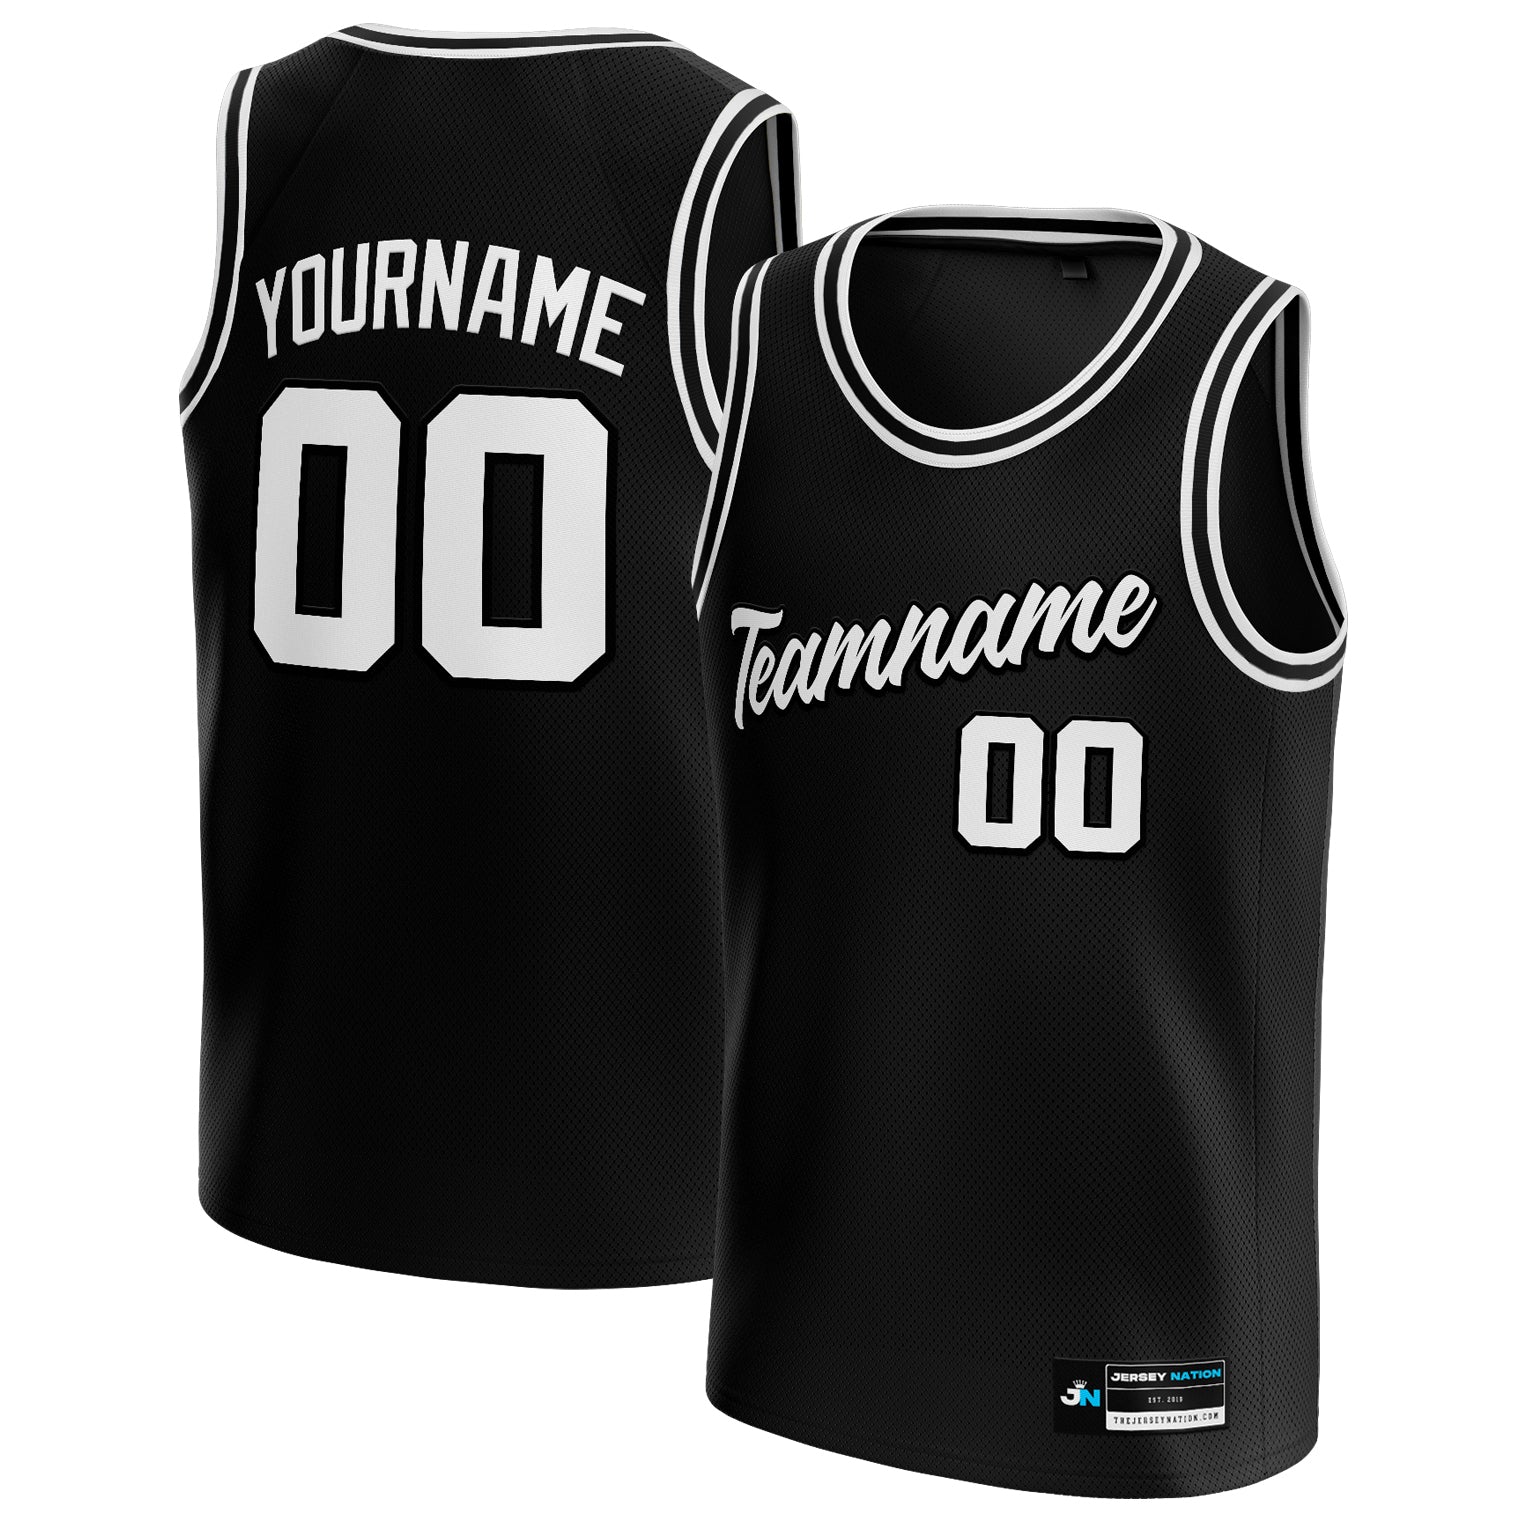 The Jersey Nation Black-White Custom Basketball Jersey - Youth XL